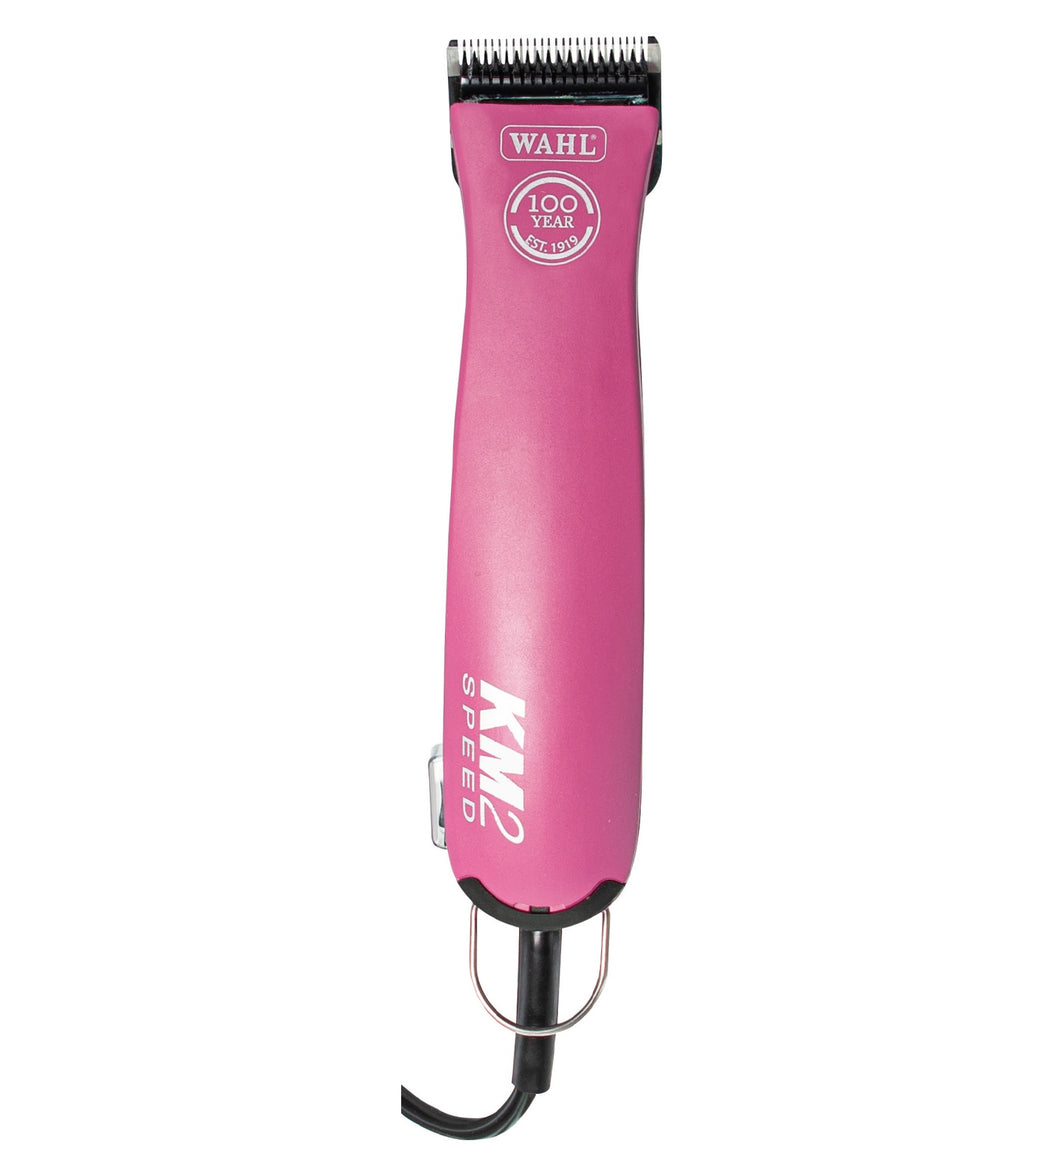 Tosatrice professionale WAHL KM2 Speed Pink